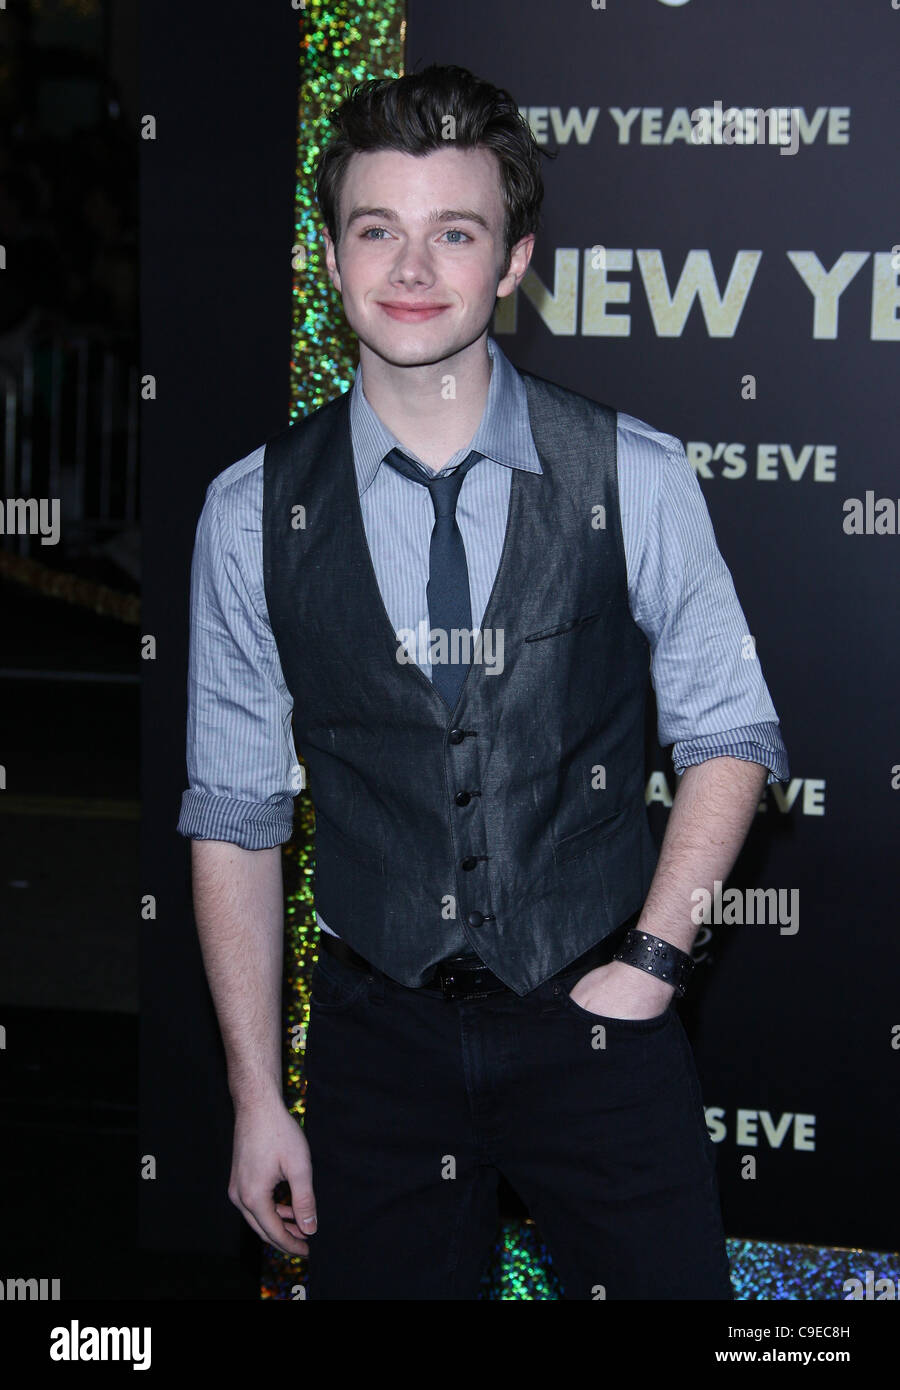 CHRIS COLFER NEW YEAR'S EVE. WORLD PREMIERE HOLLYWOOD LOS ANGELES ...